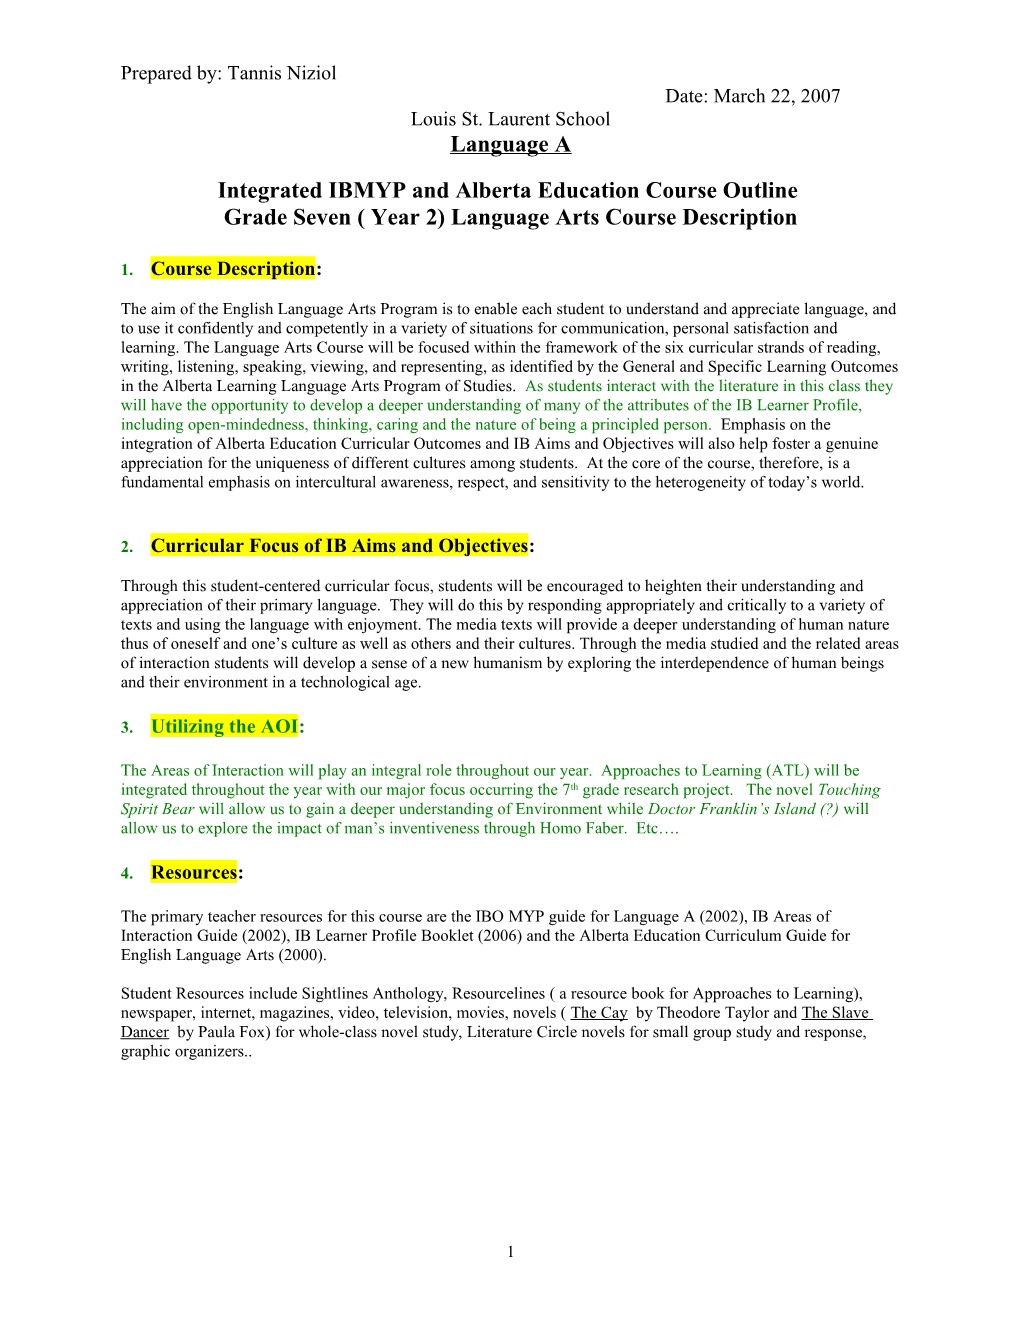 Integrated IBMYP and Alberta Learning Course Outline Language A